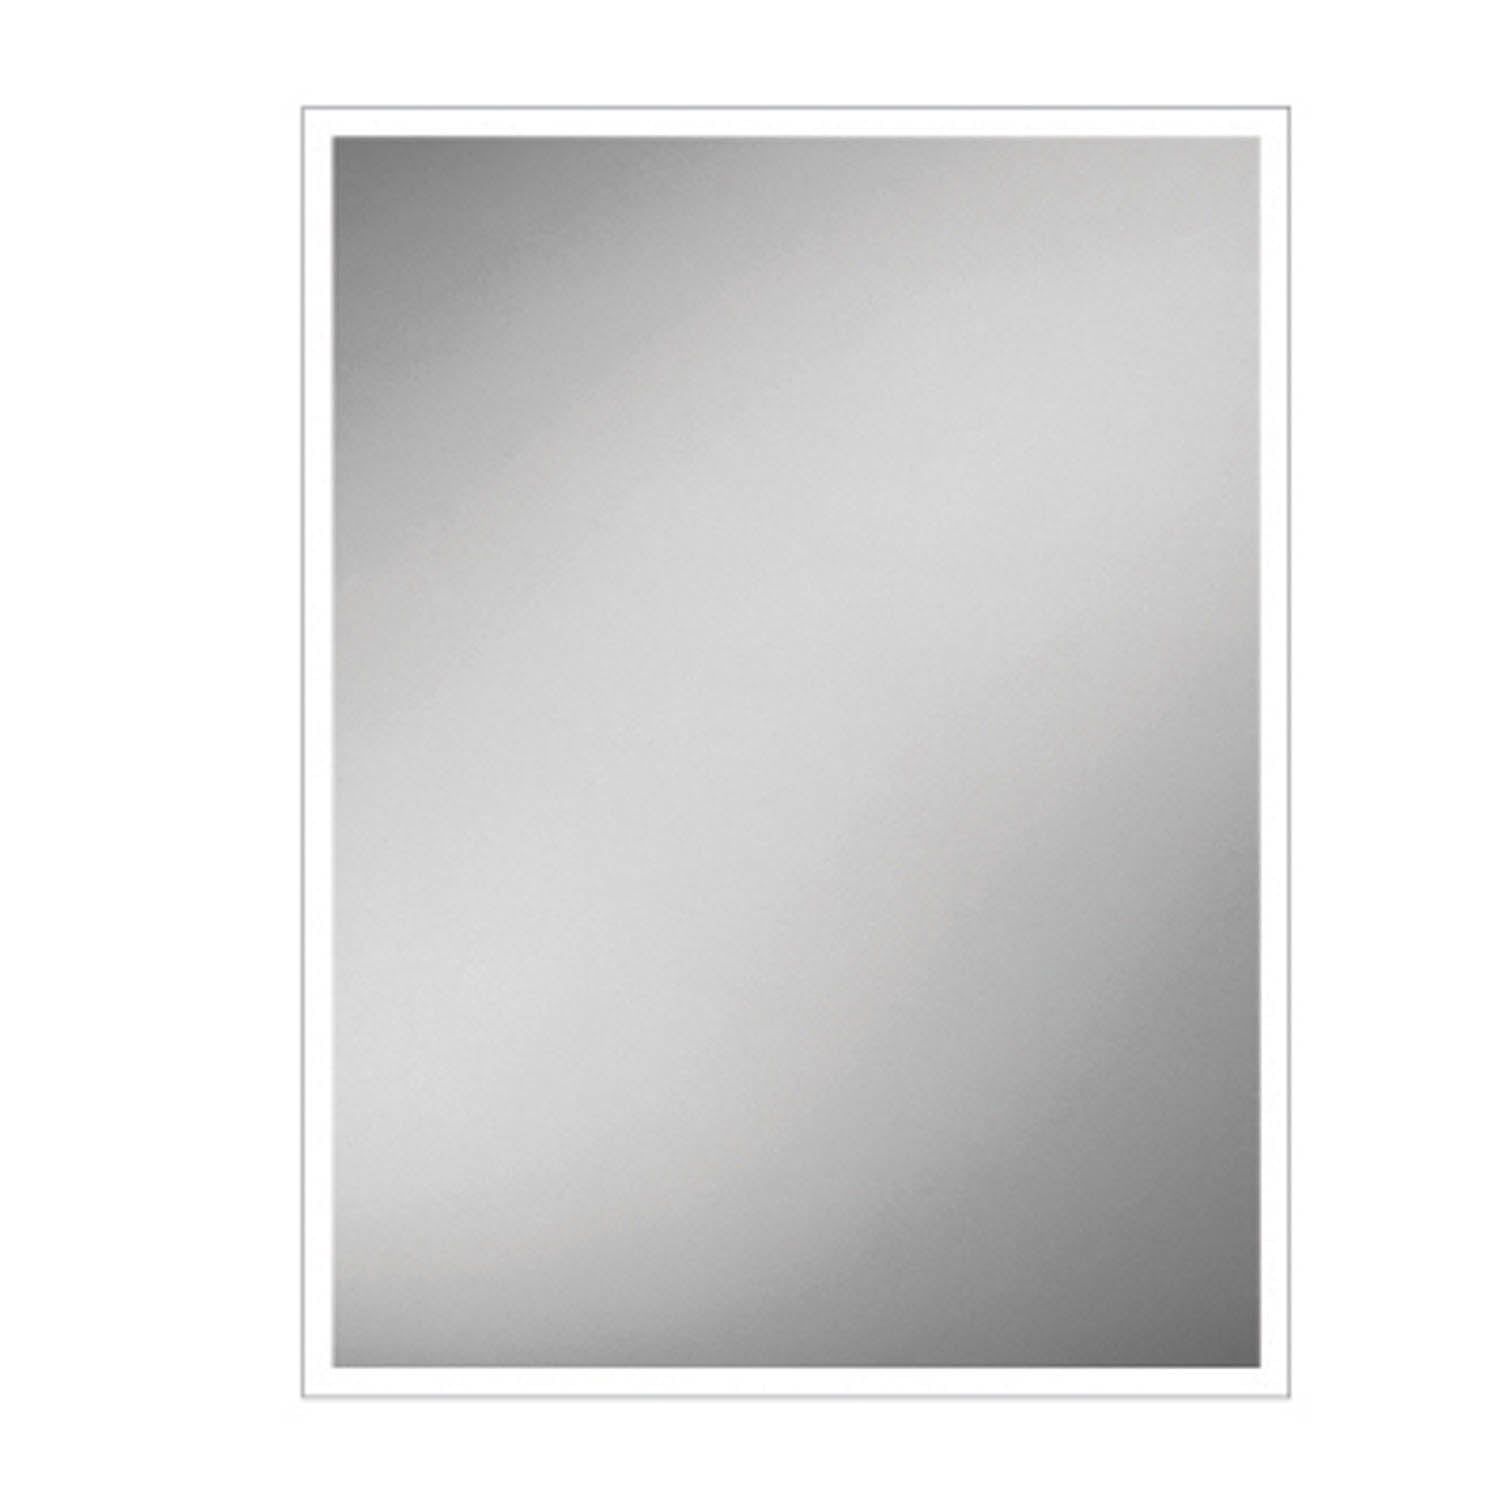 800x600mm Front Lit LED Light Mirror on a white background